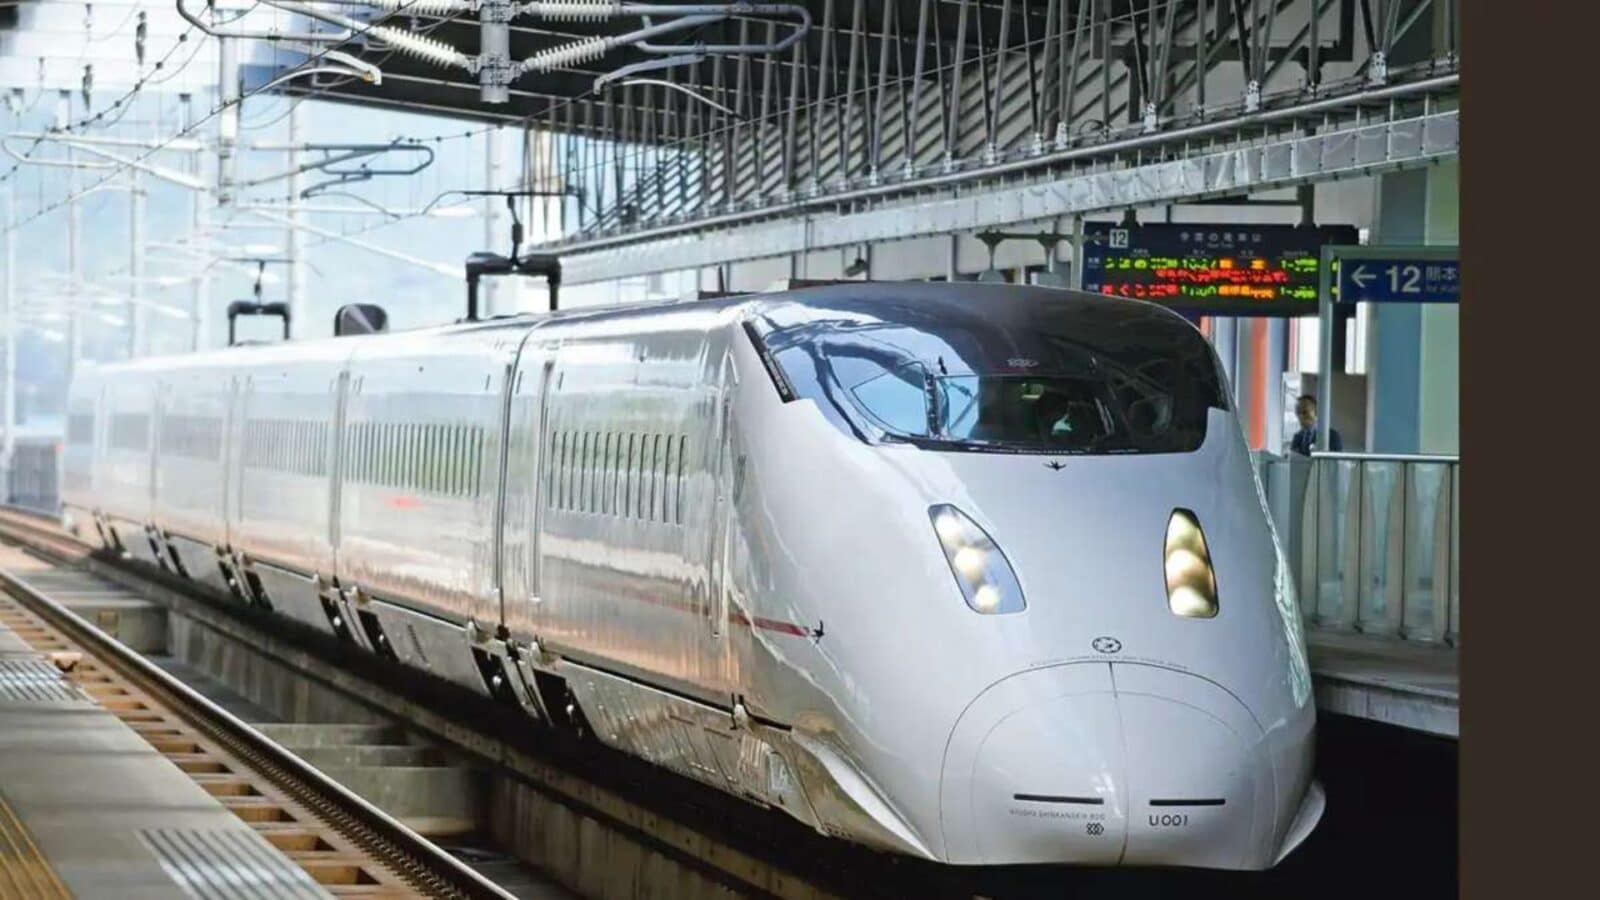 India’s First Bullet Train To Run in June-July 2026